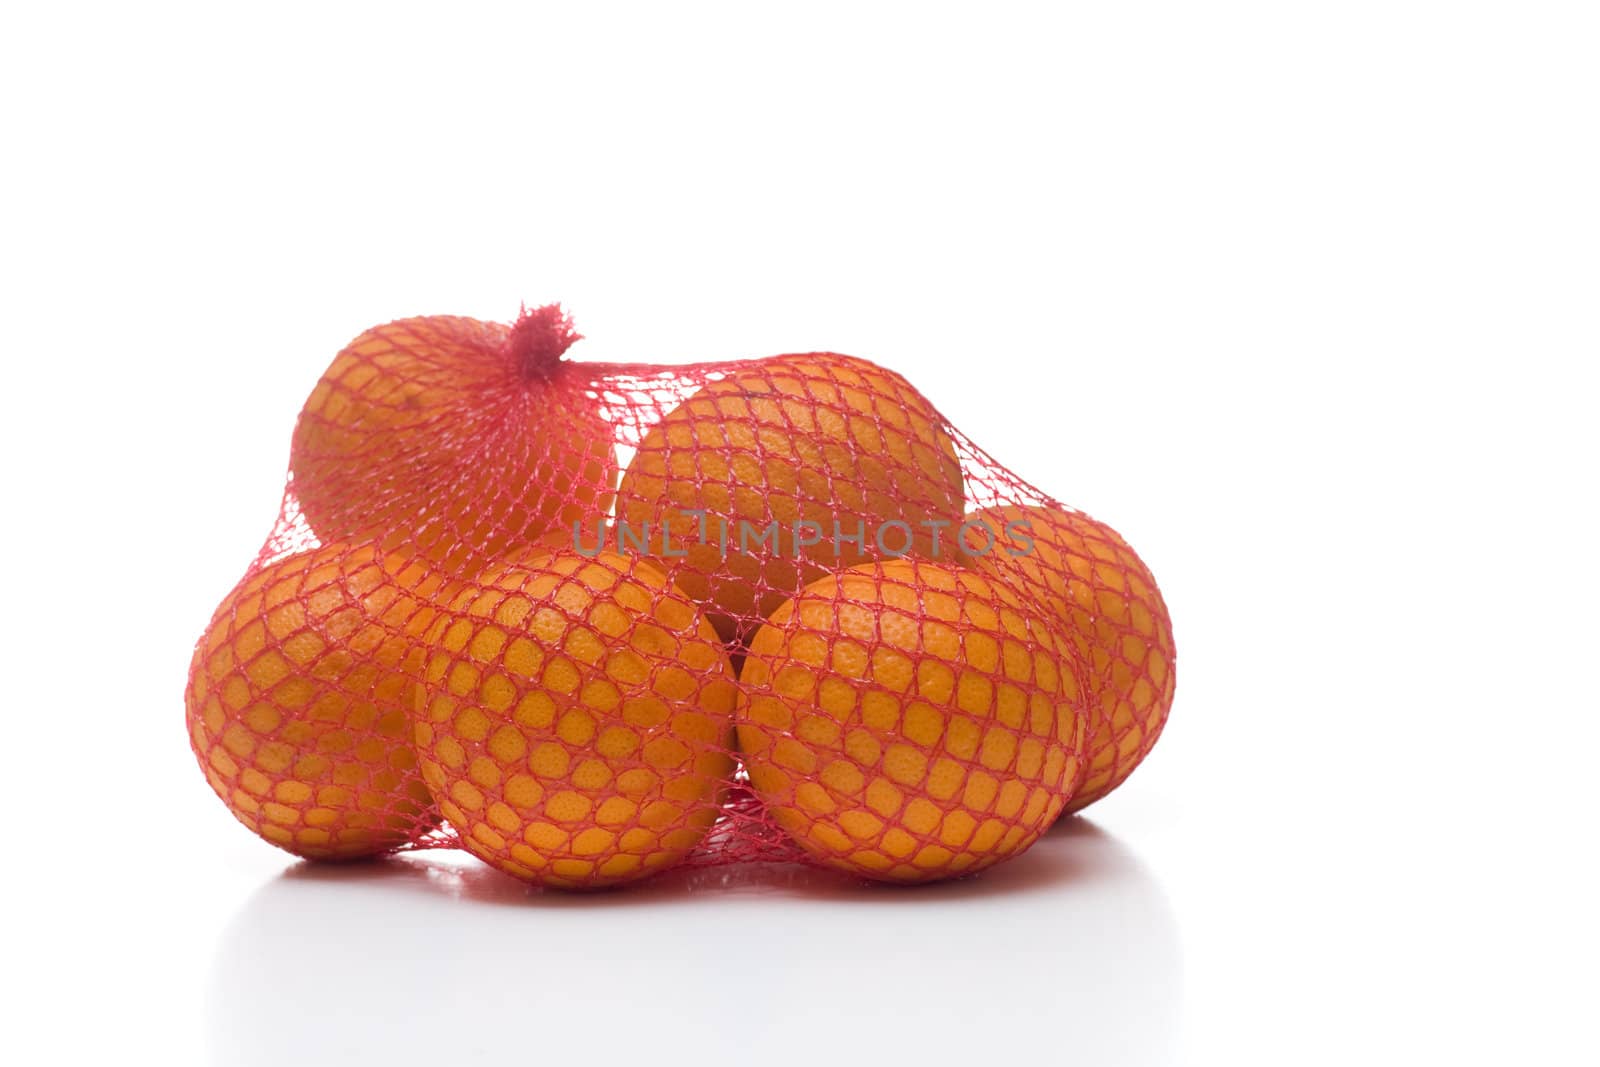 Bunched of oranges in netting isolated on white by woodygraphs